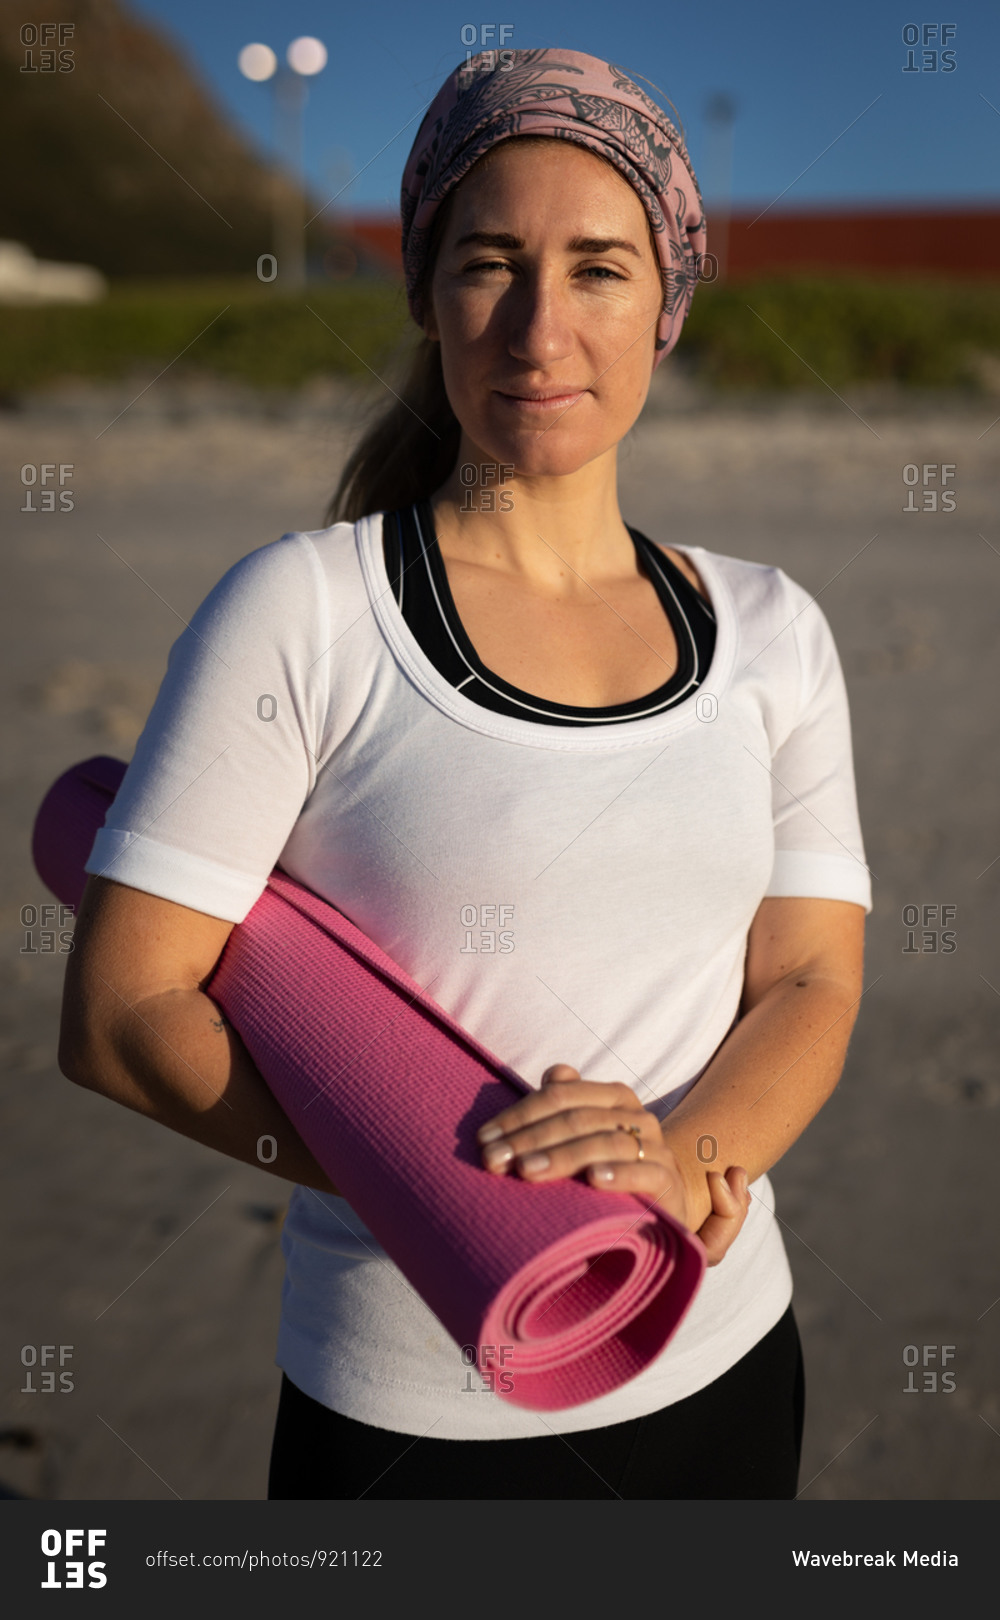 Portrait of a Caucasian woman, wearing white shirt and hair band, holding pink yoga mat under her arm, standing on a sunny beach.